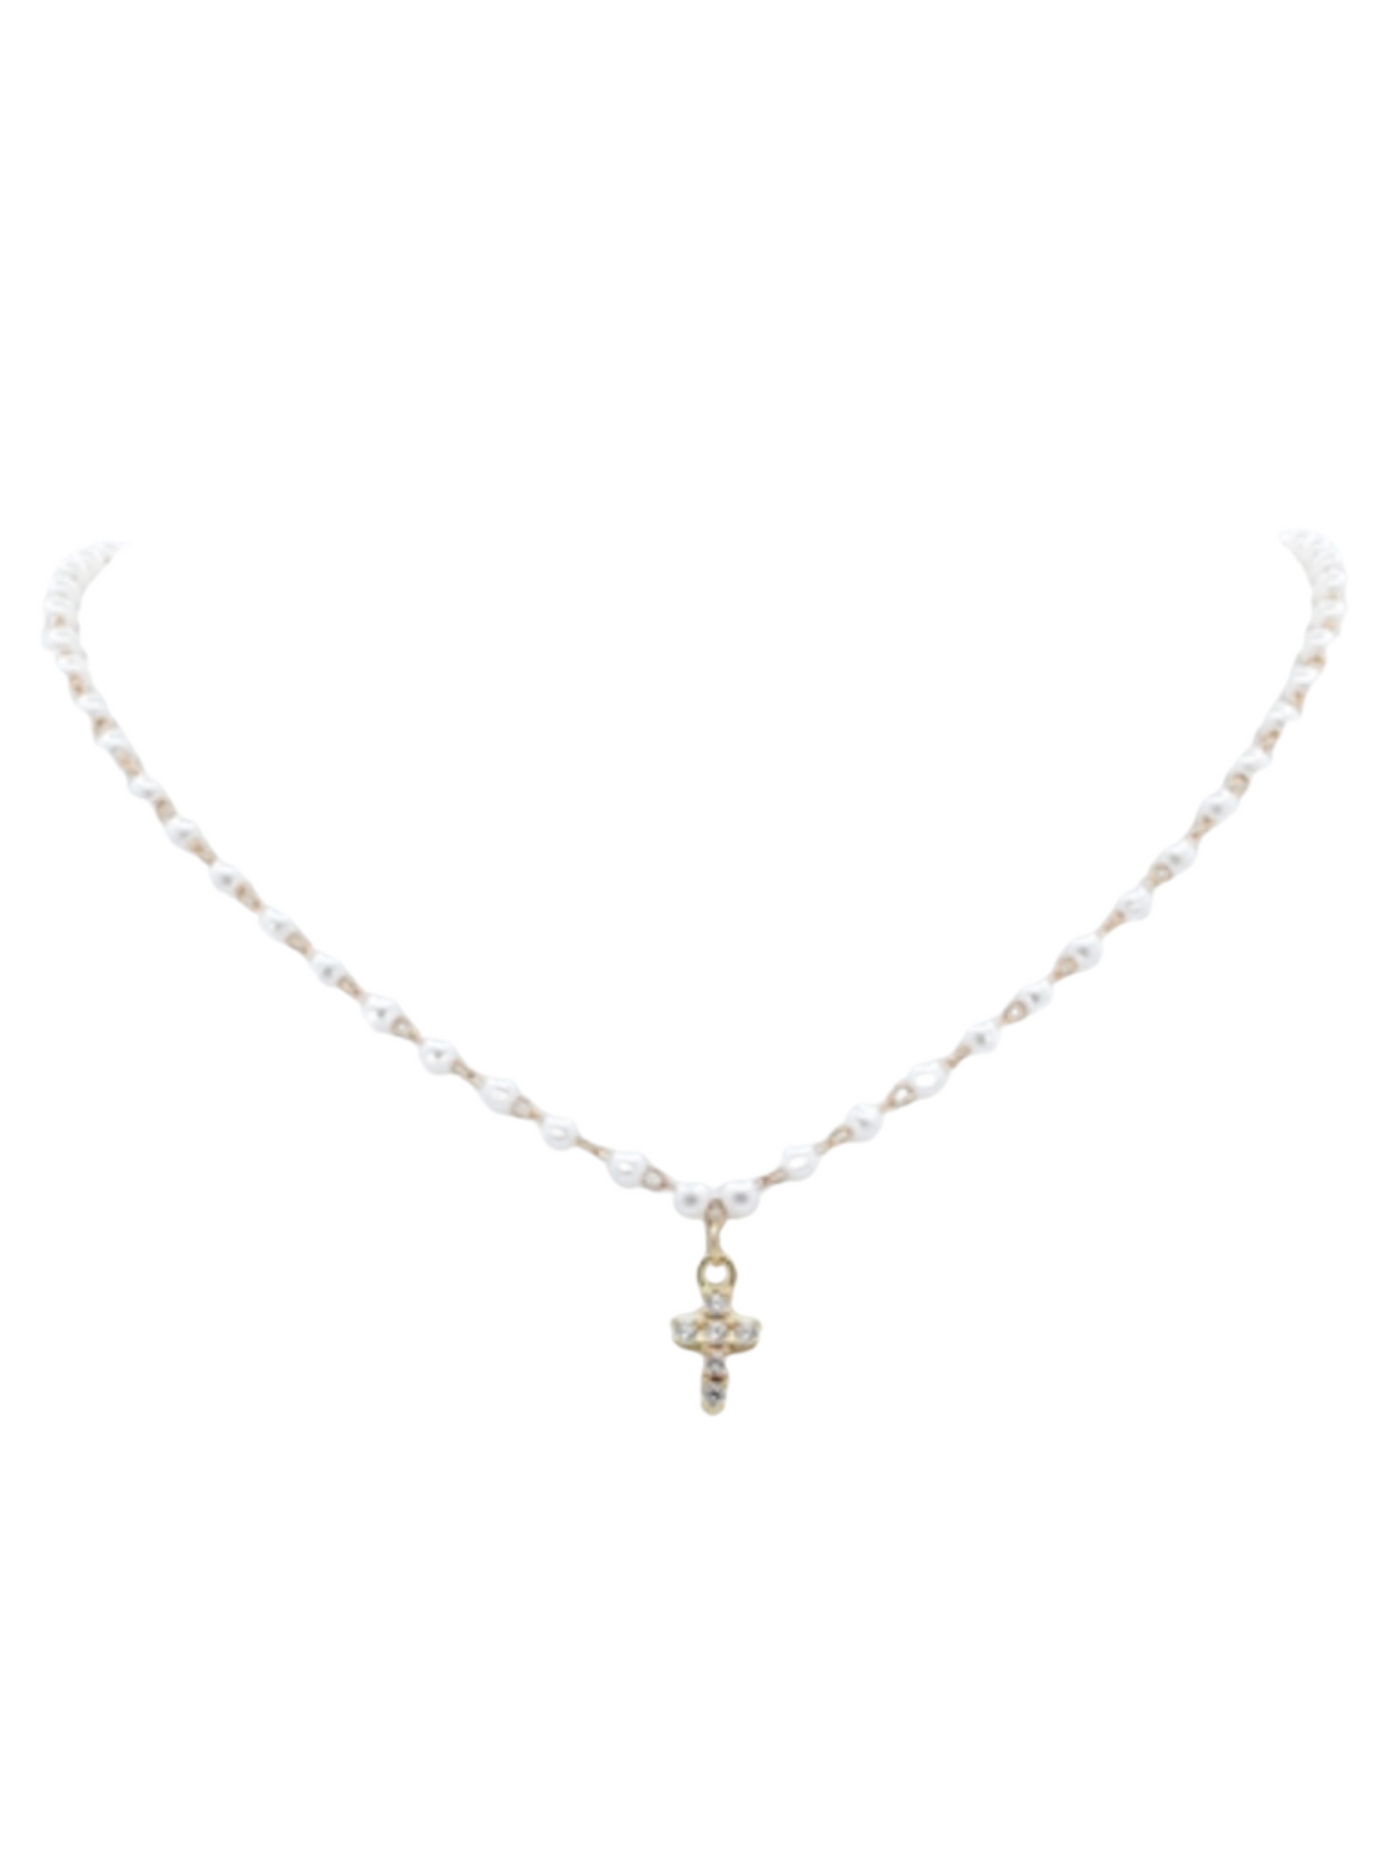 Dainty Pearl and Chain Necklace with Cross Charm